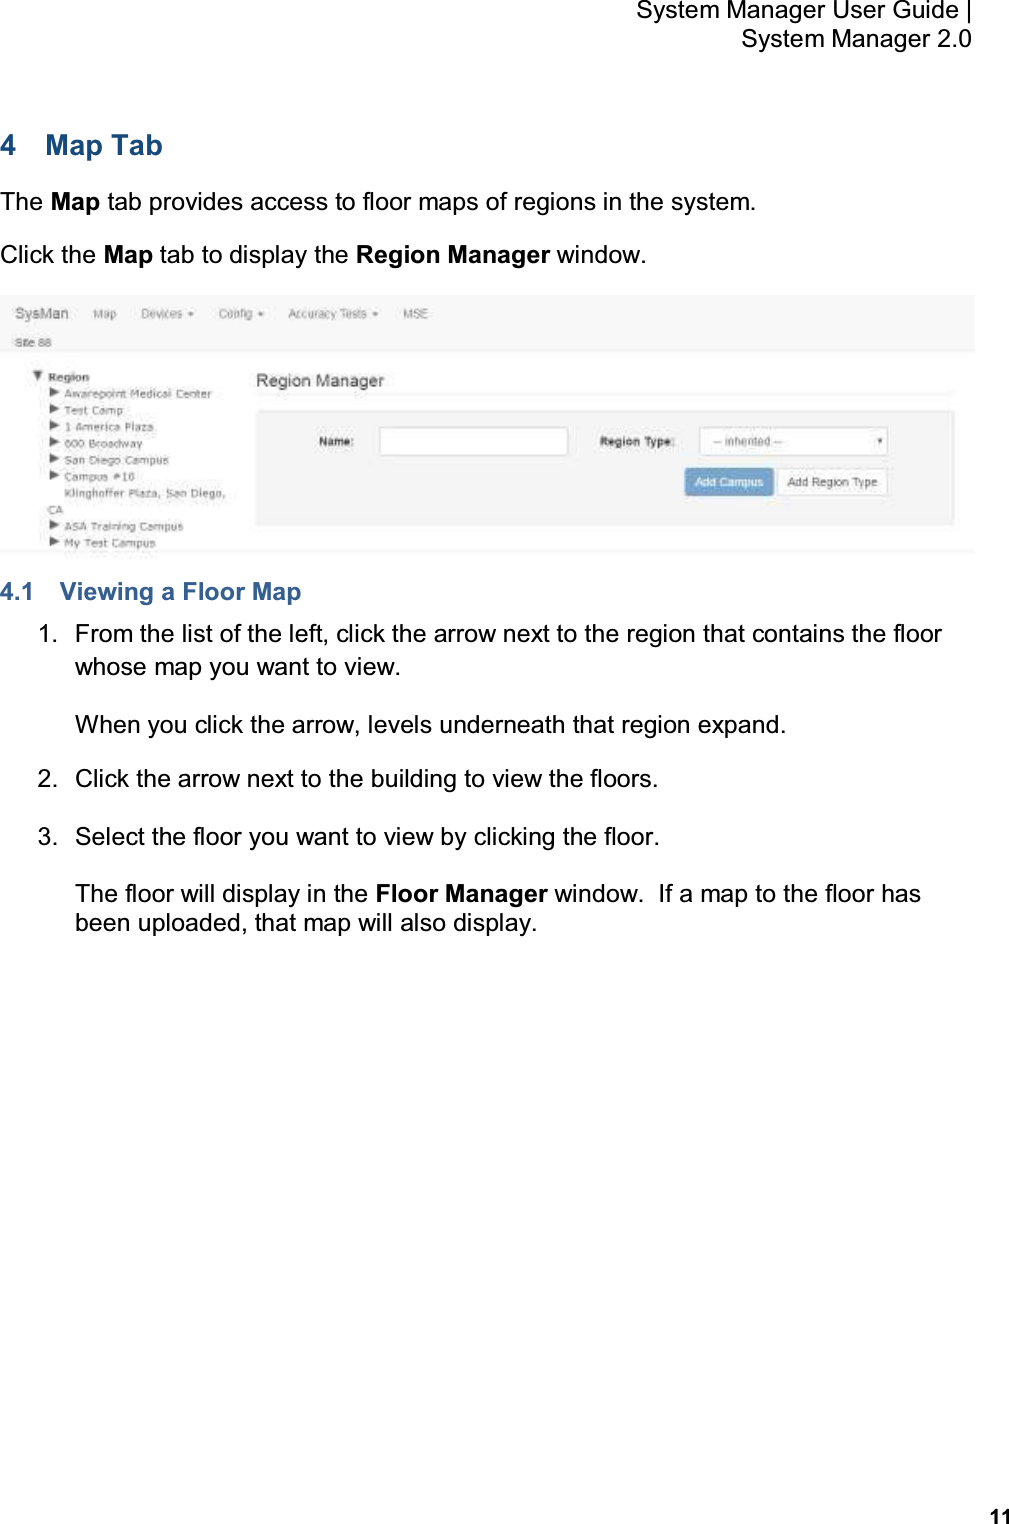           11 System Manager User Guide |  System Manager 2.0 4  Map Tab The Map tab provides access to floor maps of regions in the system. Click the Map tab to display the Region Manager window.  4.1  Viewing a Floor Map 1.  From the list of the left, click the arrow next to the region that contains the floor whose map you want to view. When you click the arrow, levels underneath that region expand. 2.  Click the arrow next to the building to view the floors. 3.  Select the floor you want to view by clicking the floor. The floor will display in the Floor Manager window.  If a map to the floor has been uploaded, that map will also display. 